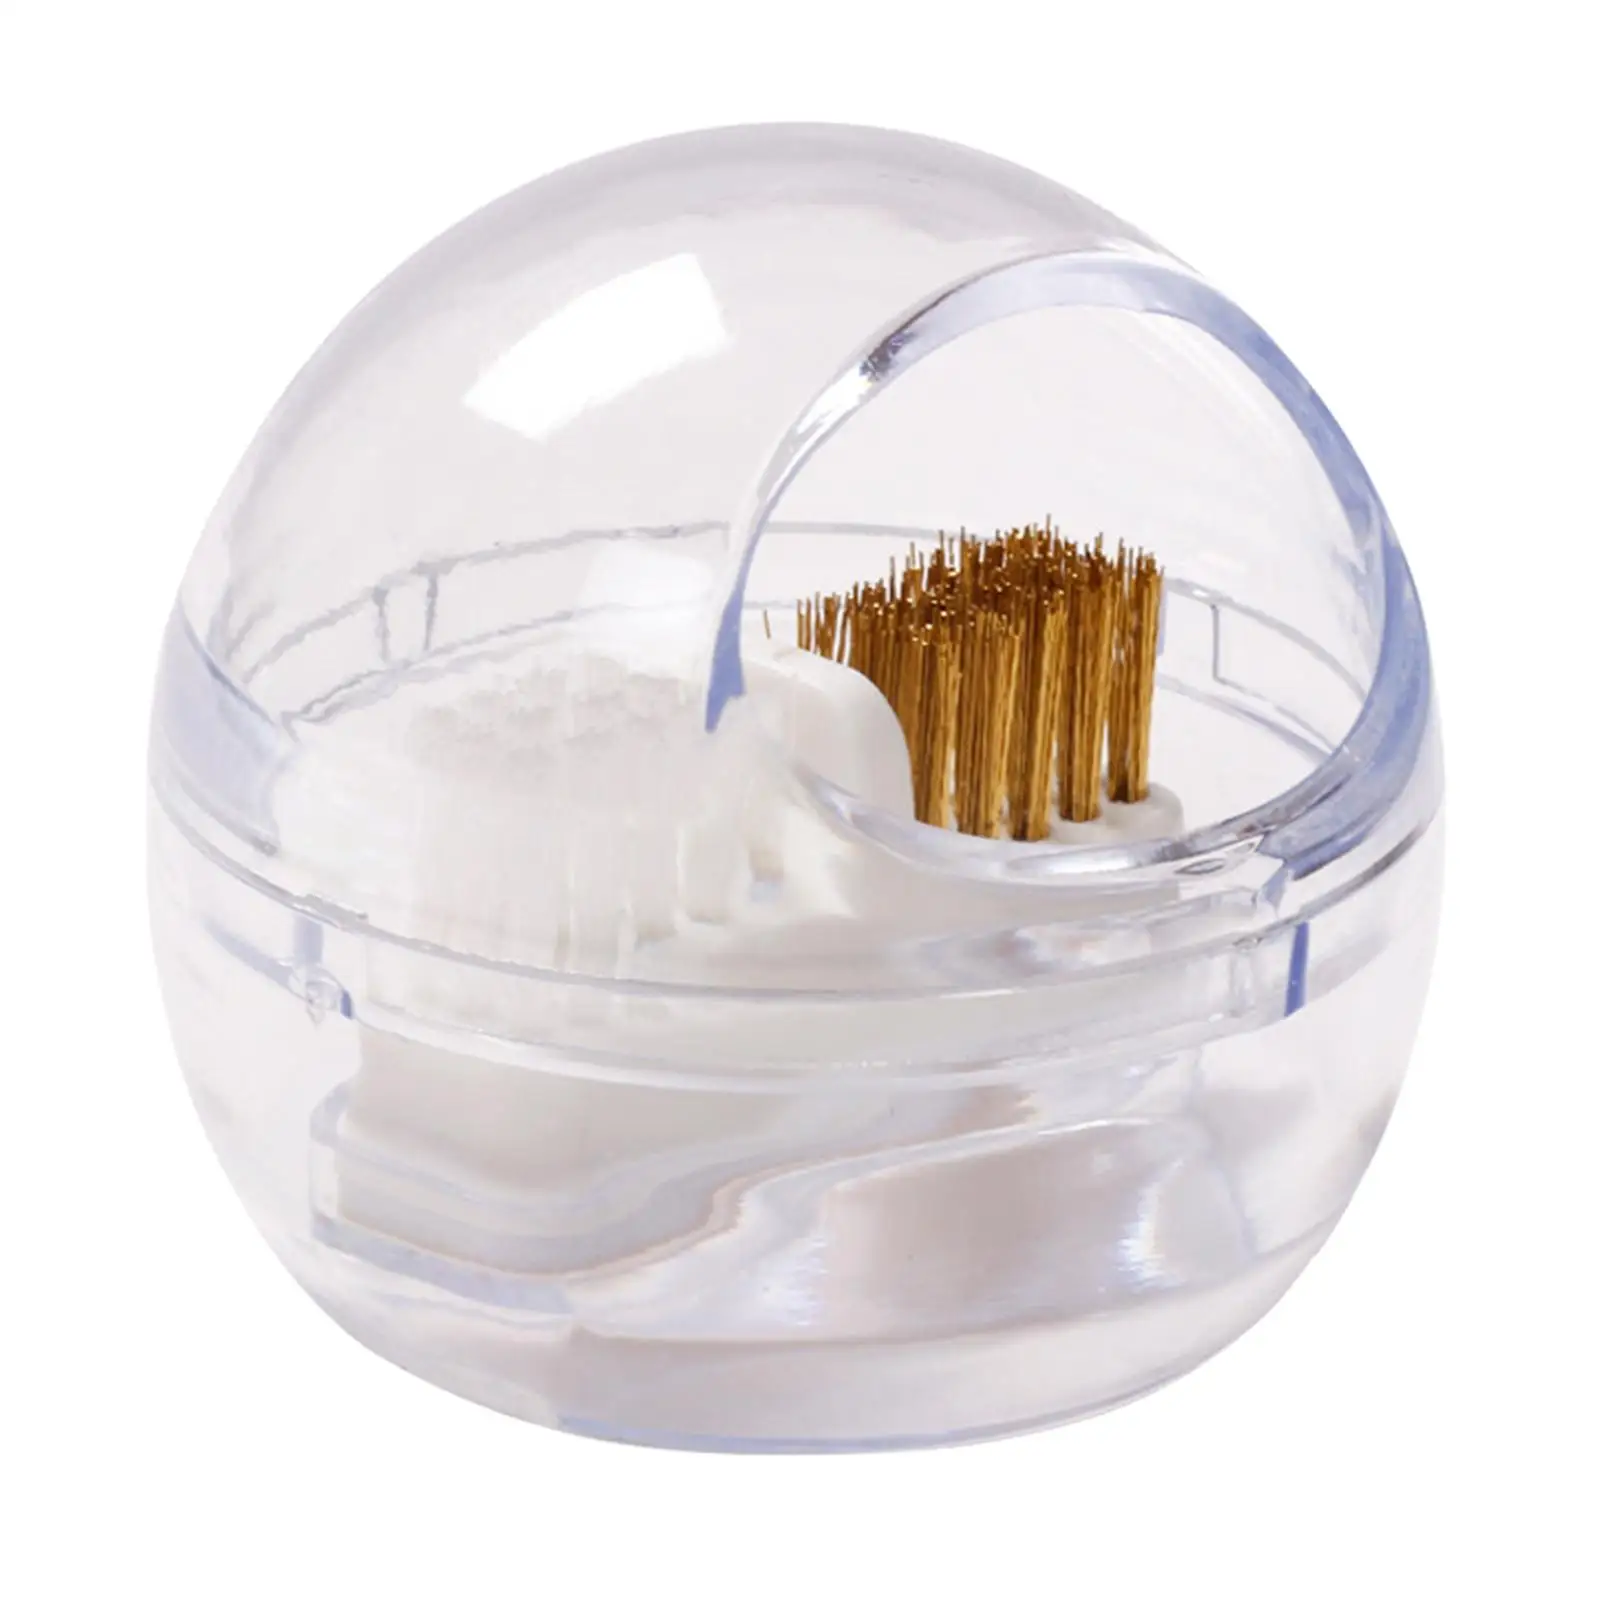 Portable Nail Bit Box Dust Cleaning for Home Use